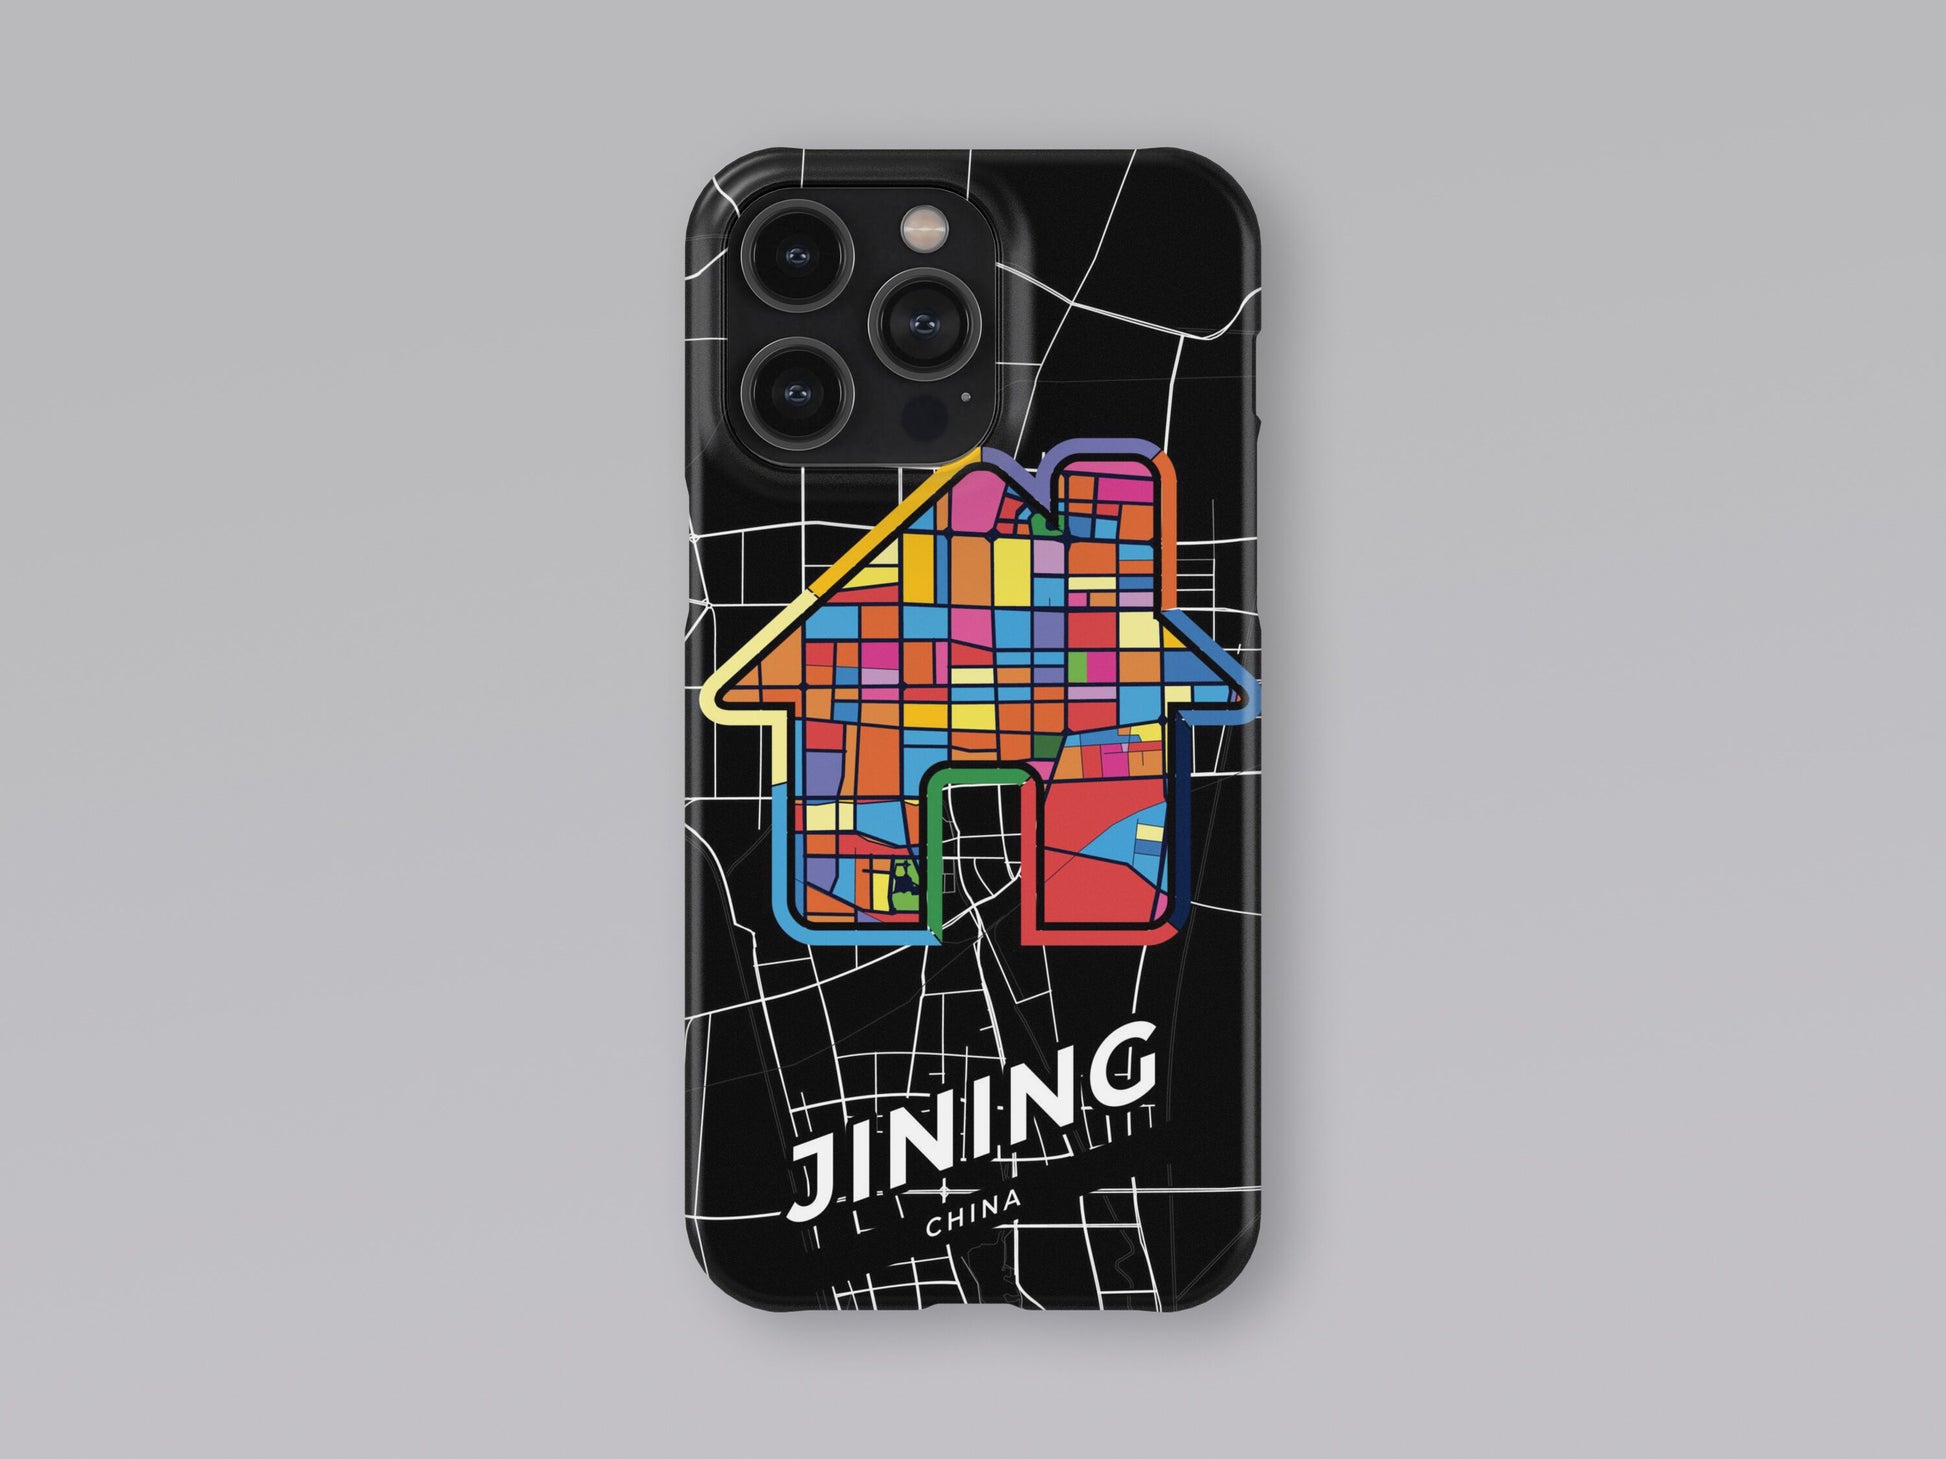 Jining China slim phone case with colorful icon. Birthday, wedding or housewarming gift. Couple match cases. 3